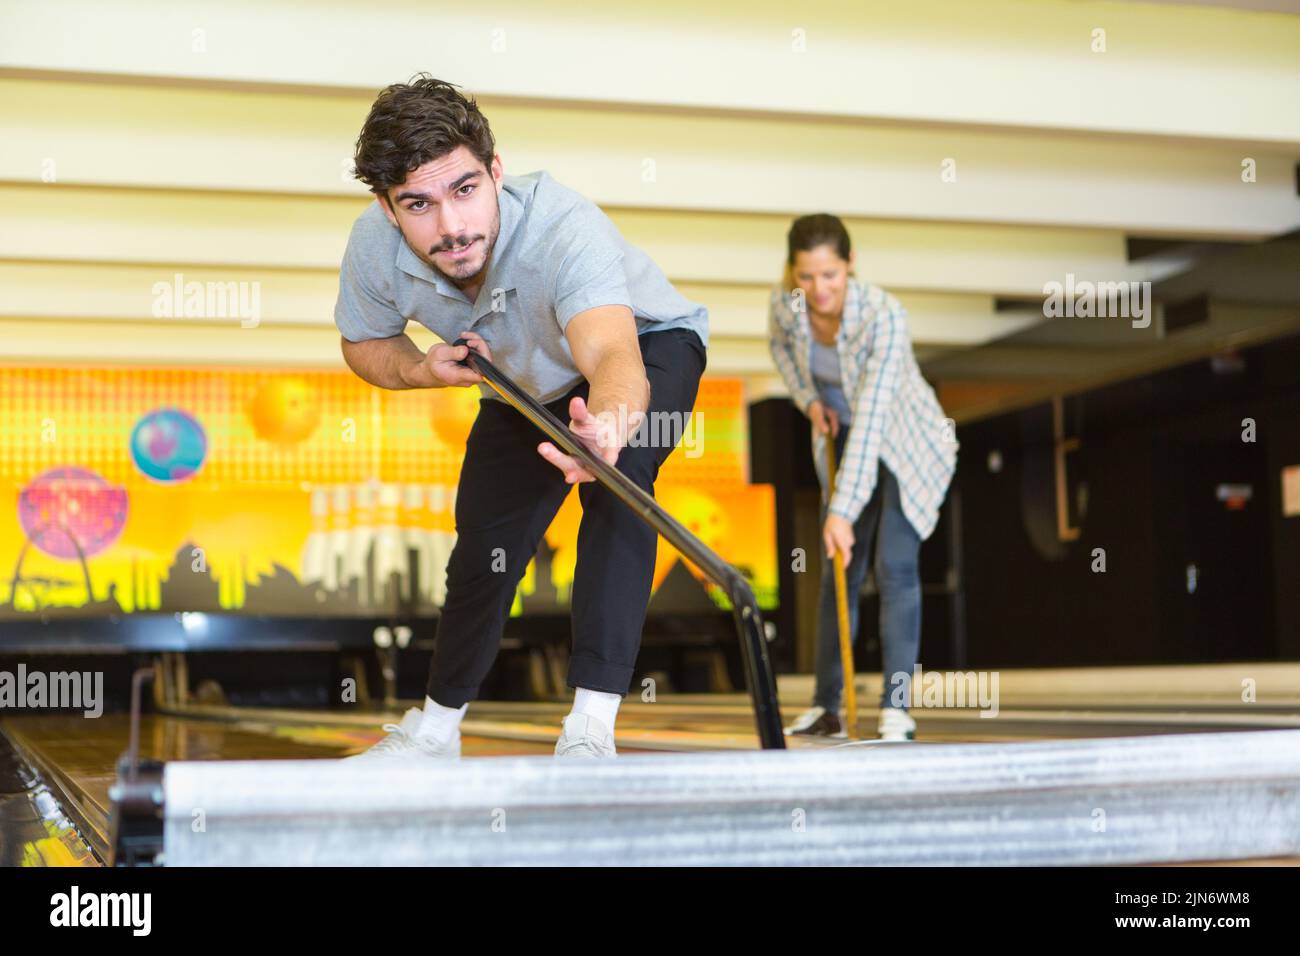 young man cleaning bowling alley Stock Photo